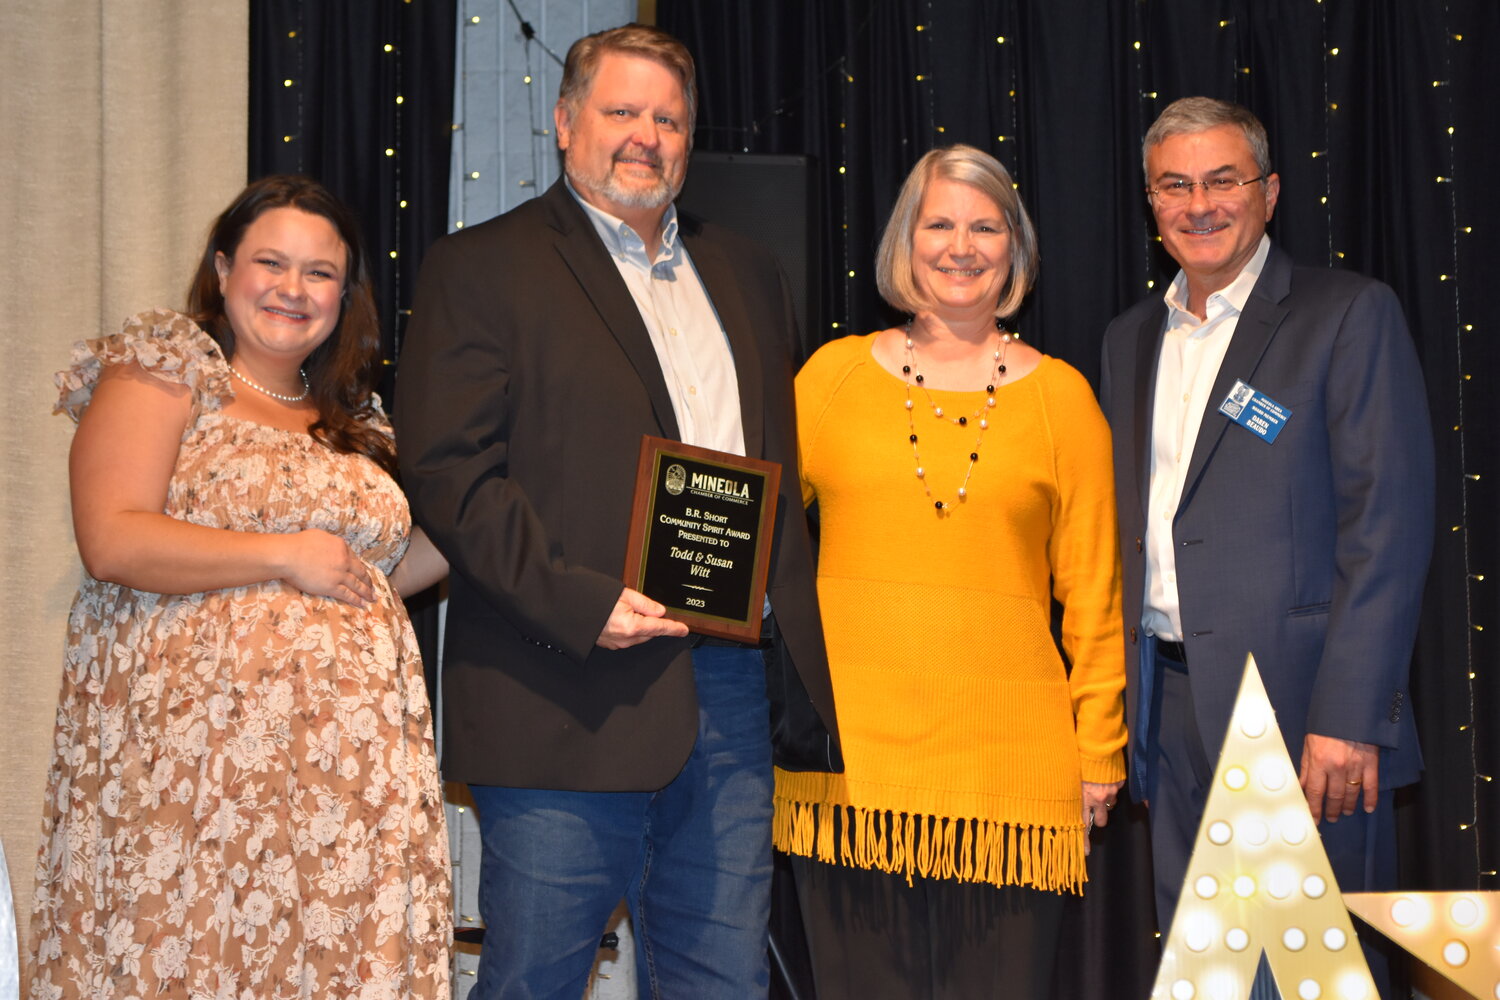 Winners of the B.R. Short Community Spirit Award were Todd and Susan Witt, center, with Chamber President Kelsie McGilvray and Vice President Daren Beaudo.